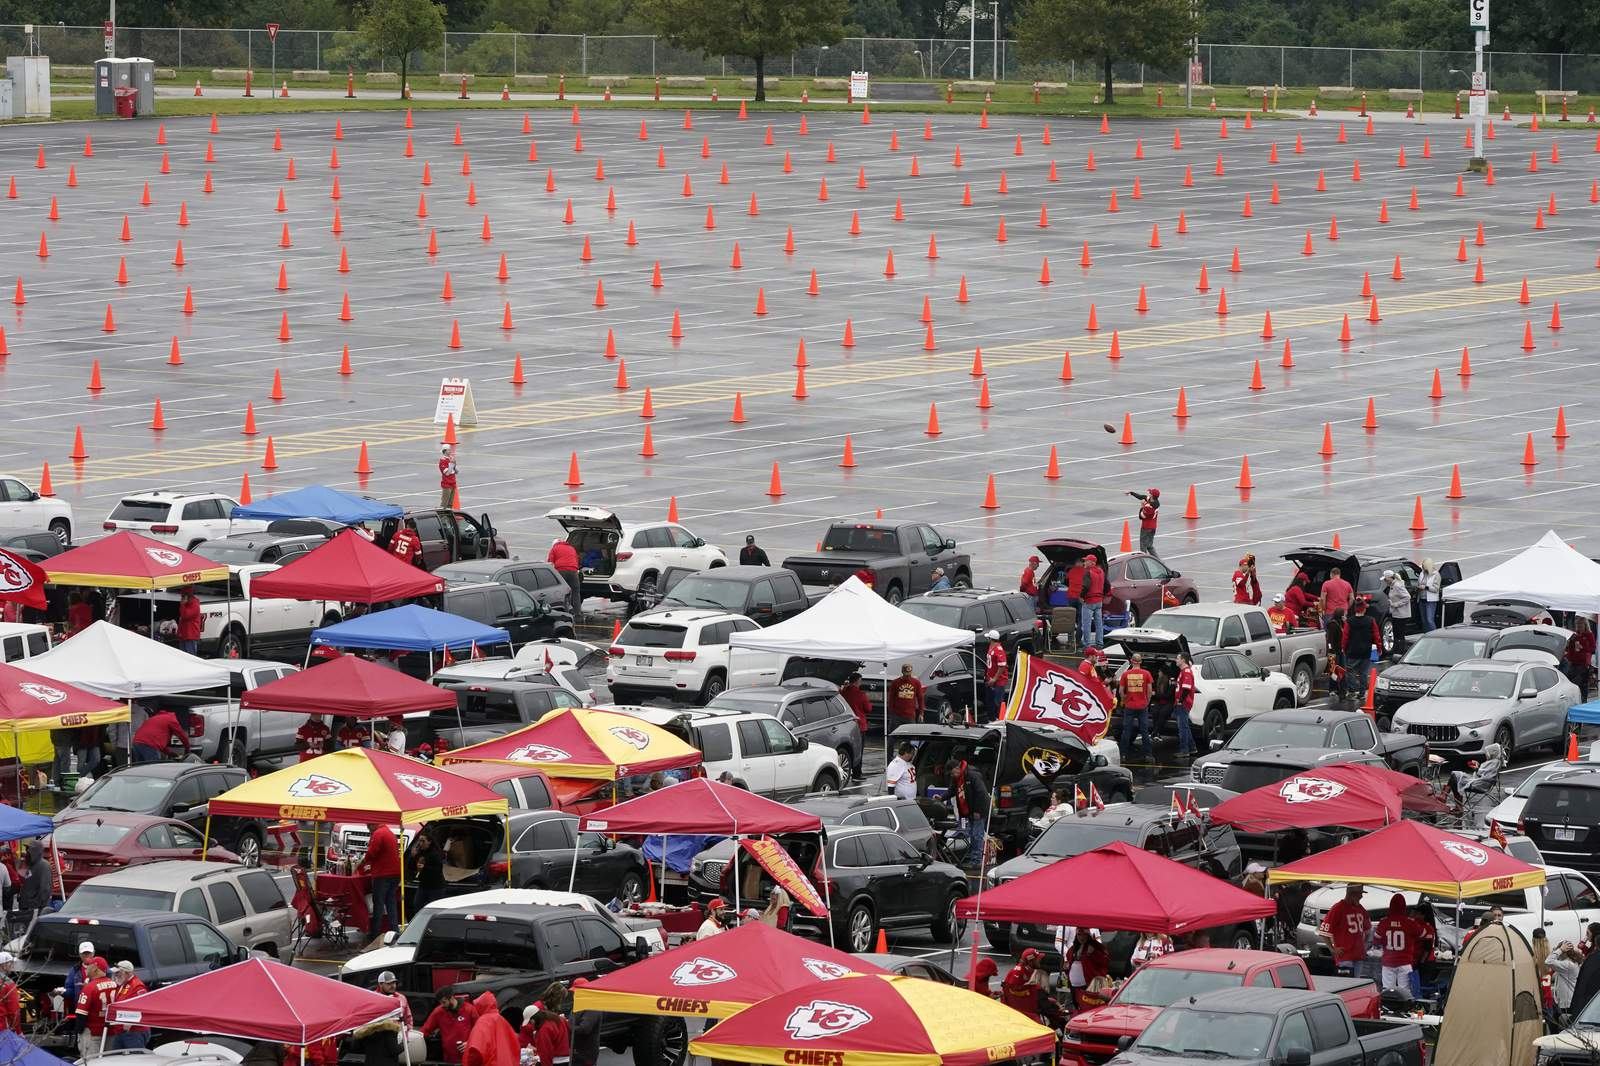 The Latest: Fans arriving for first game of NFL season